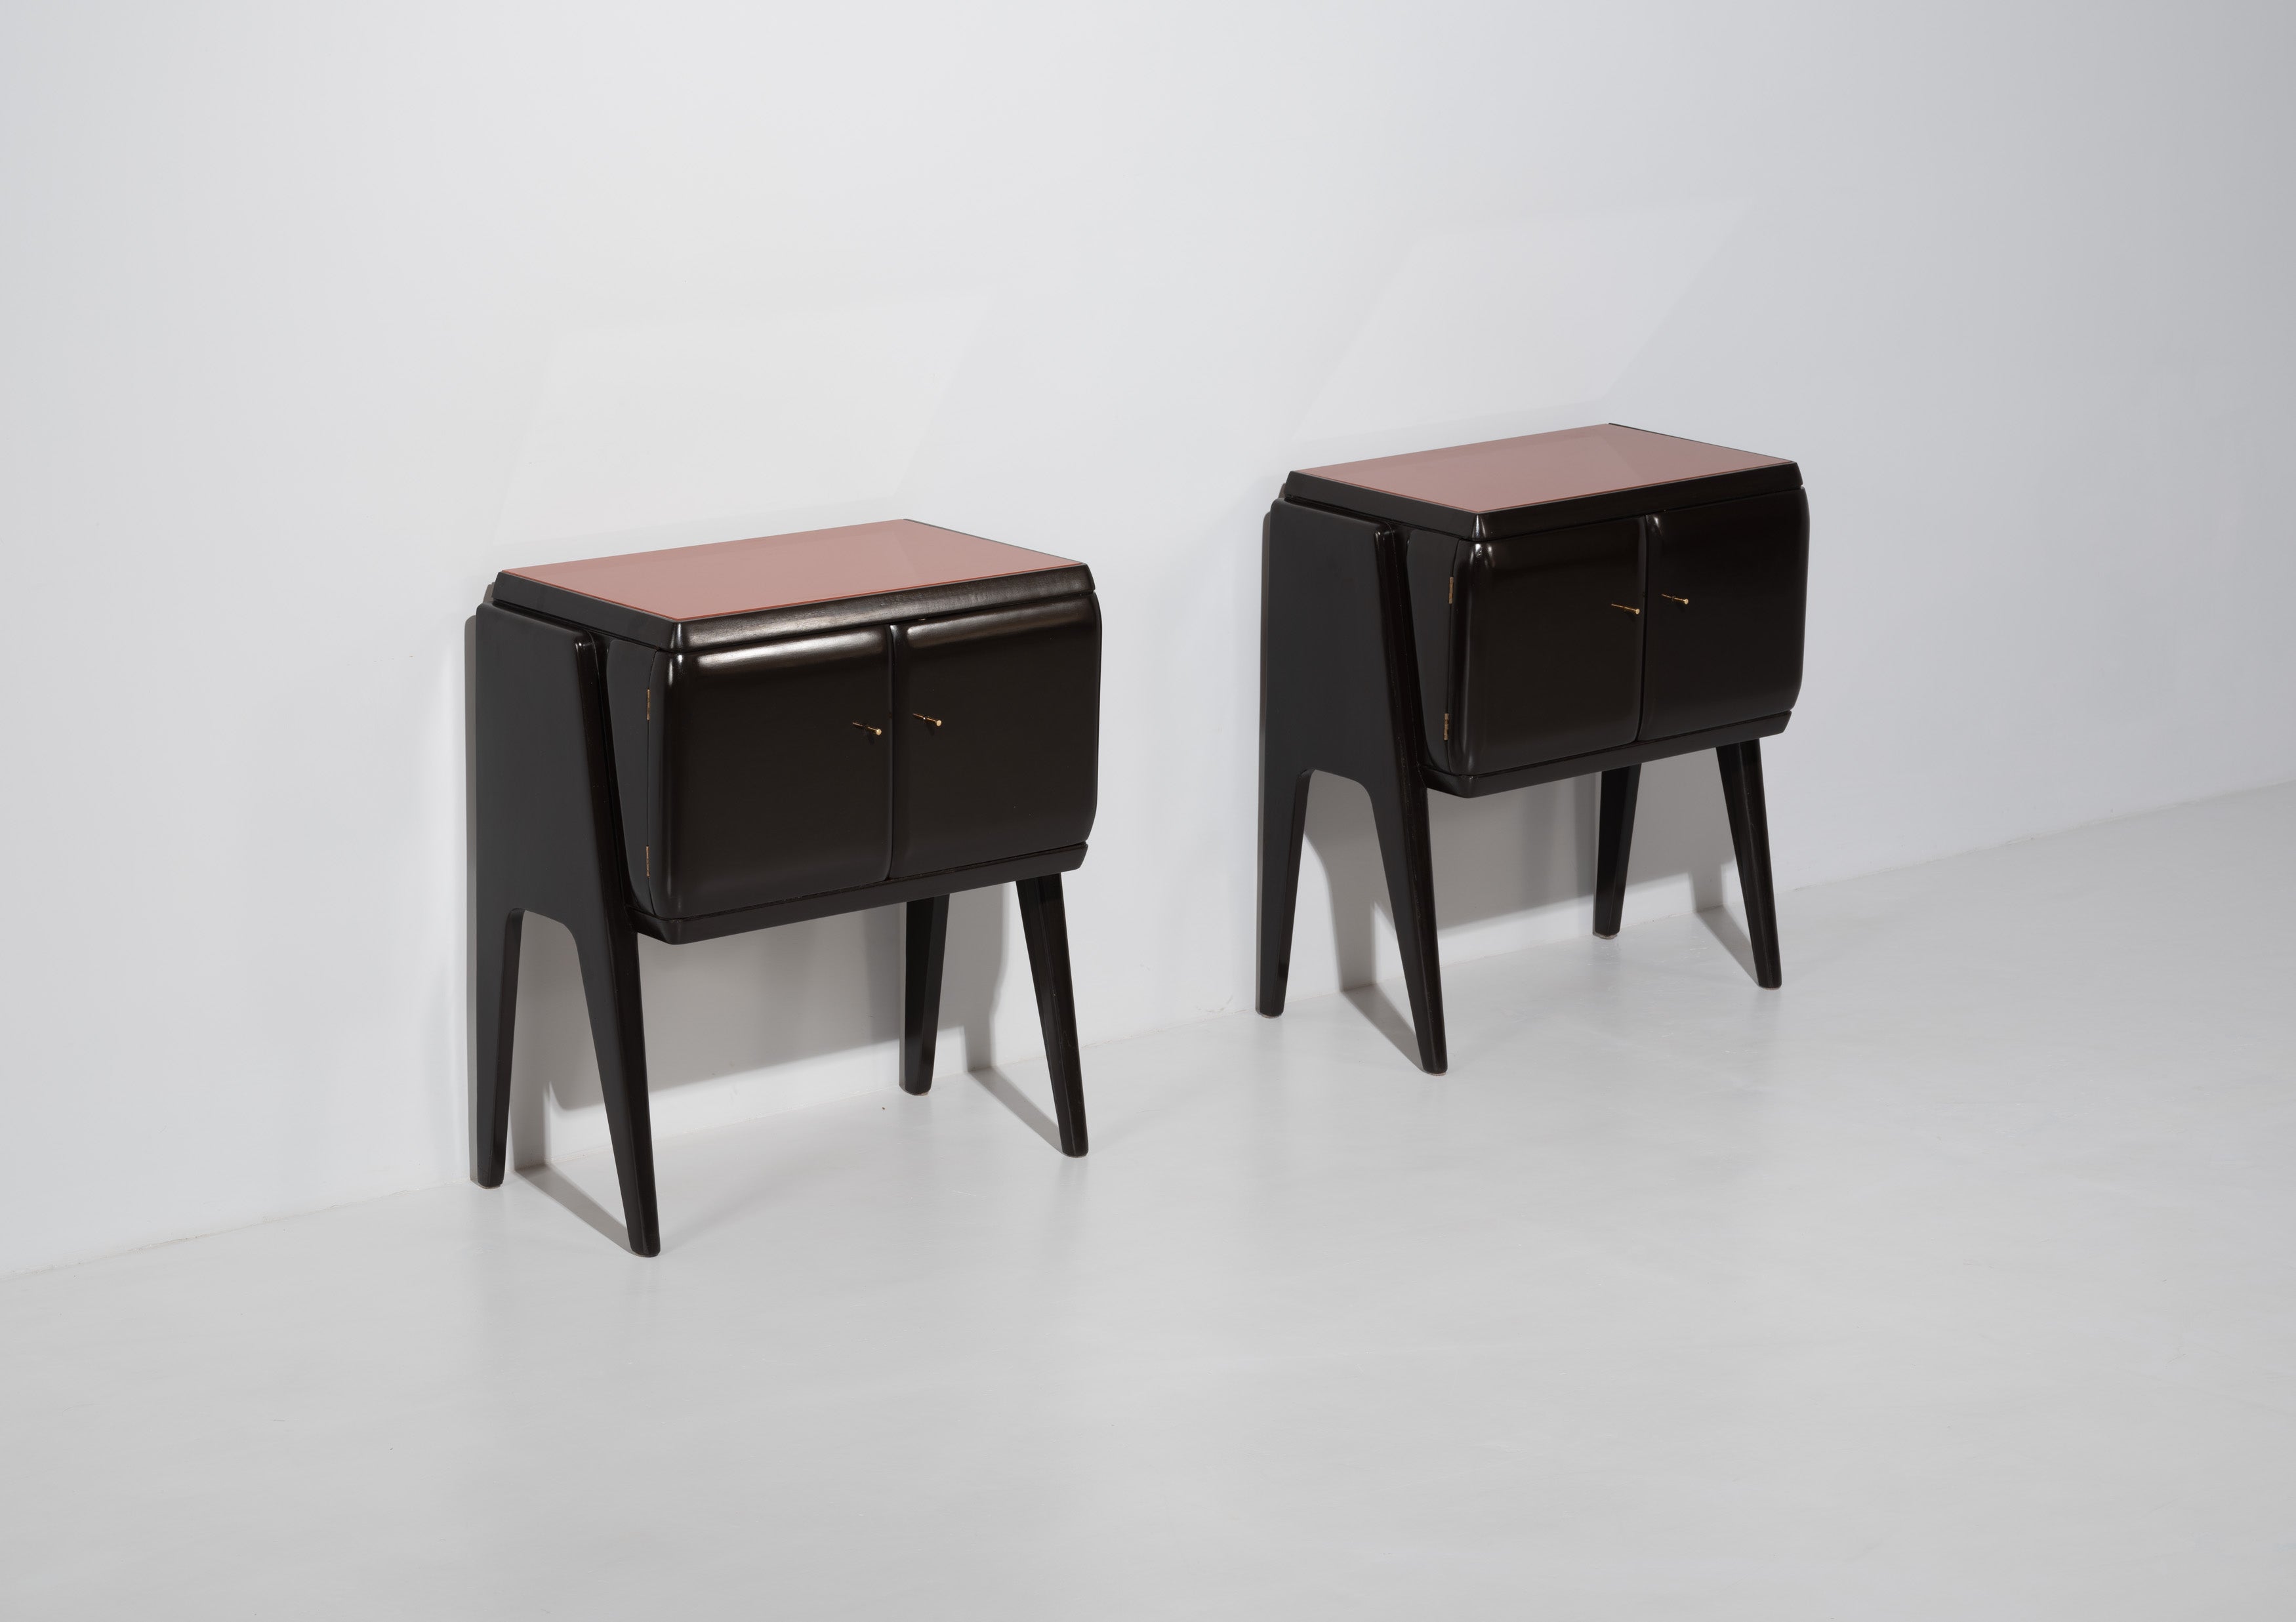 A pair of vintage bedside tables of Italian design from the 1950s

We have carried out a long restoration process together with a study and execution of resyling to give a newer and more captivating look combined with the modern design and the